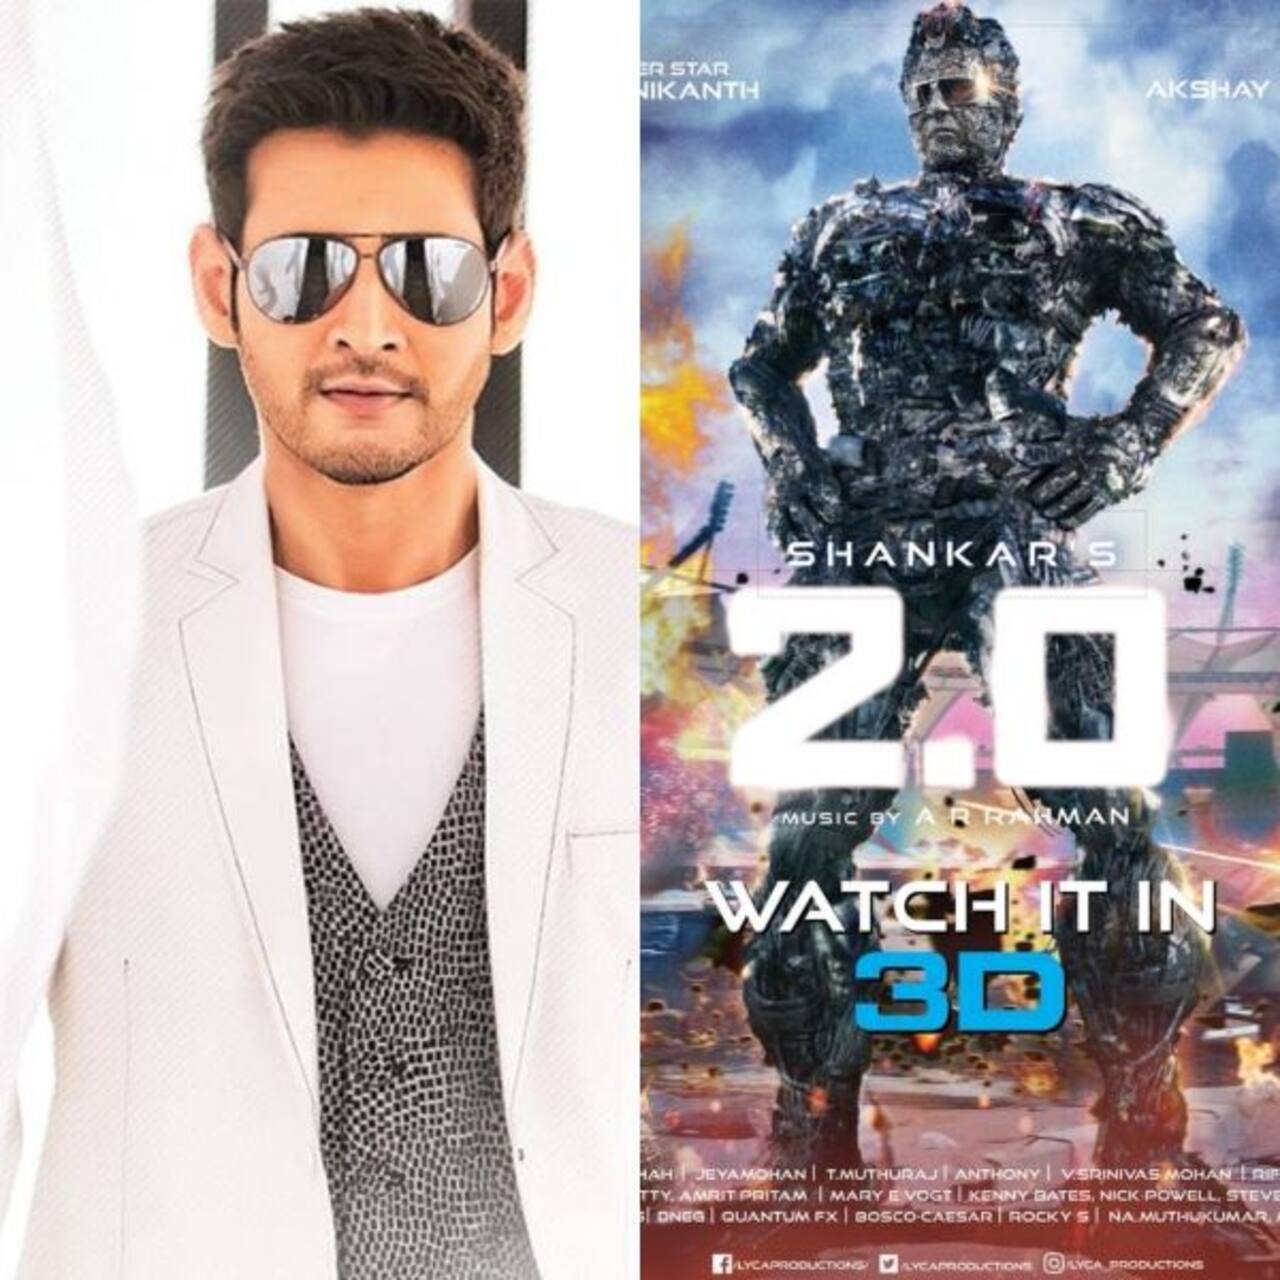 '2.0 is a cinematic gem', says Mahesh Babu about this Rajinikanth-starrer – read here